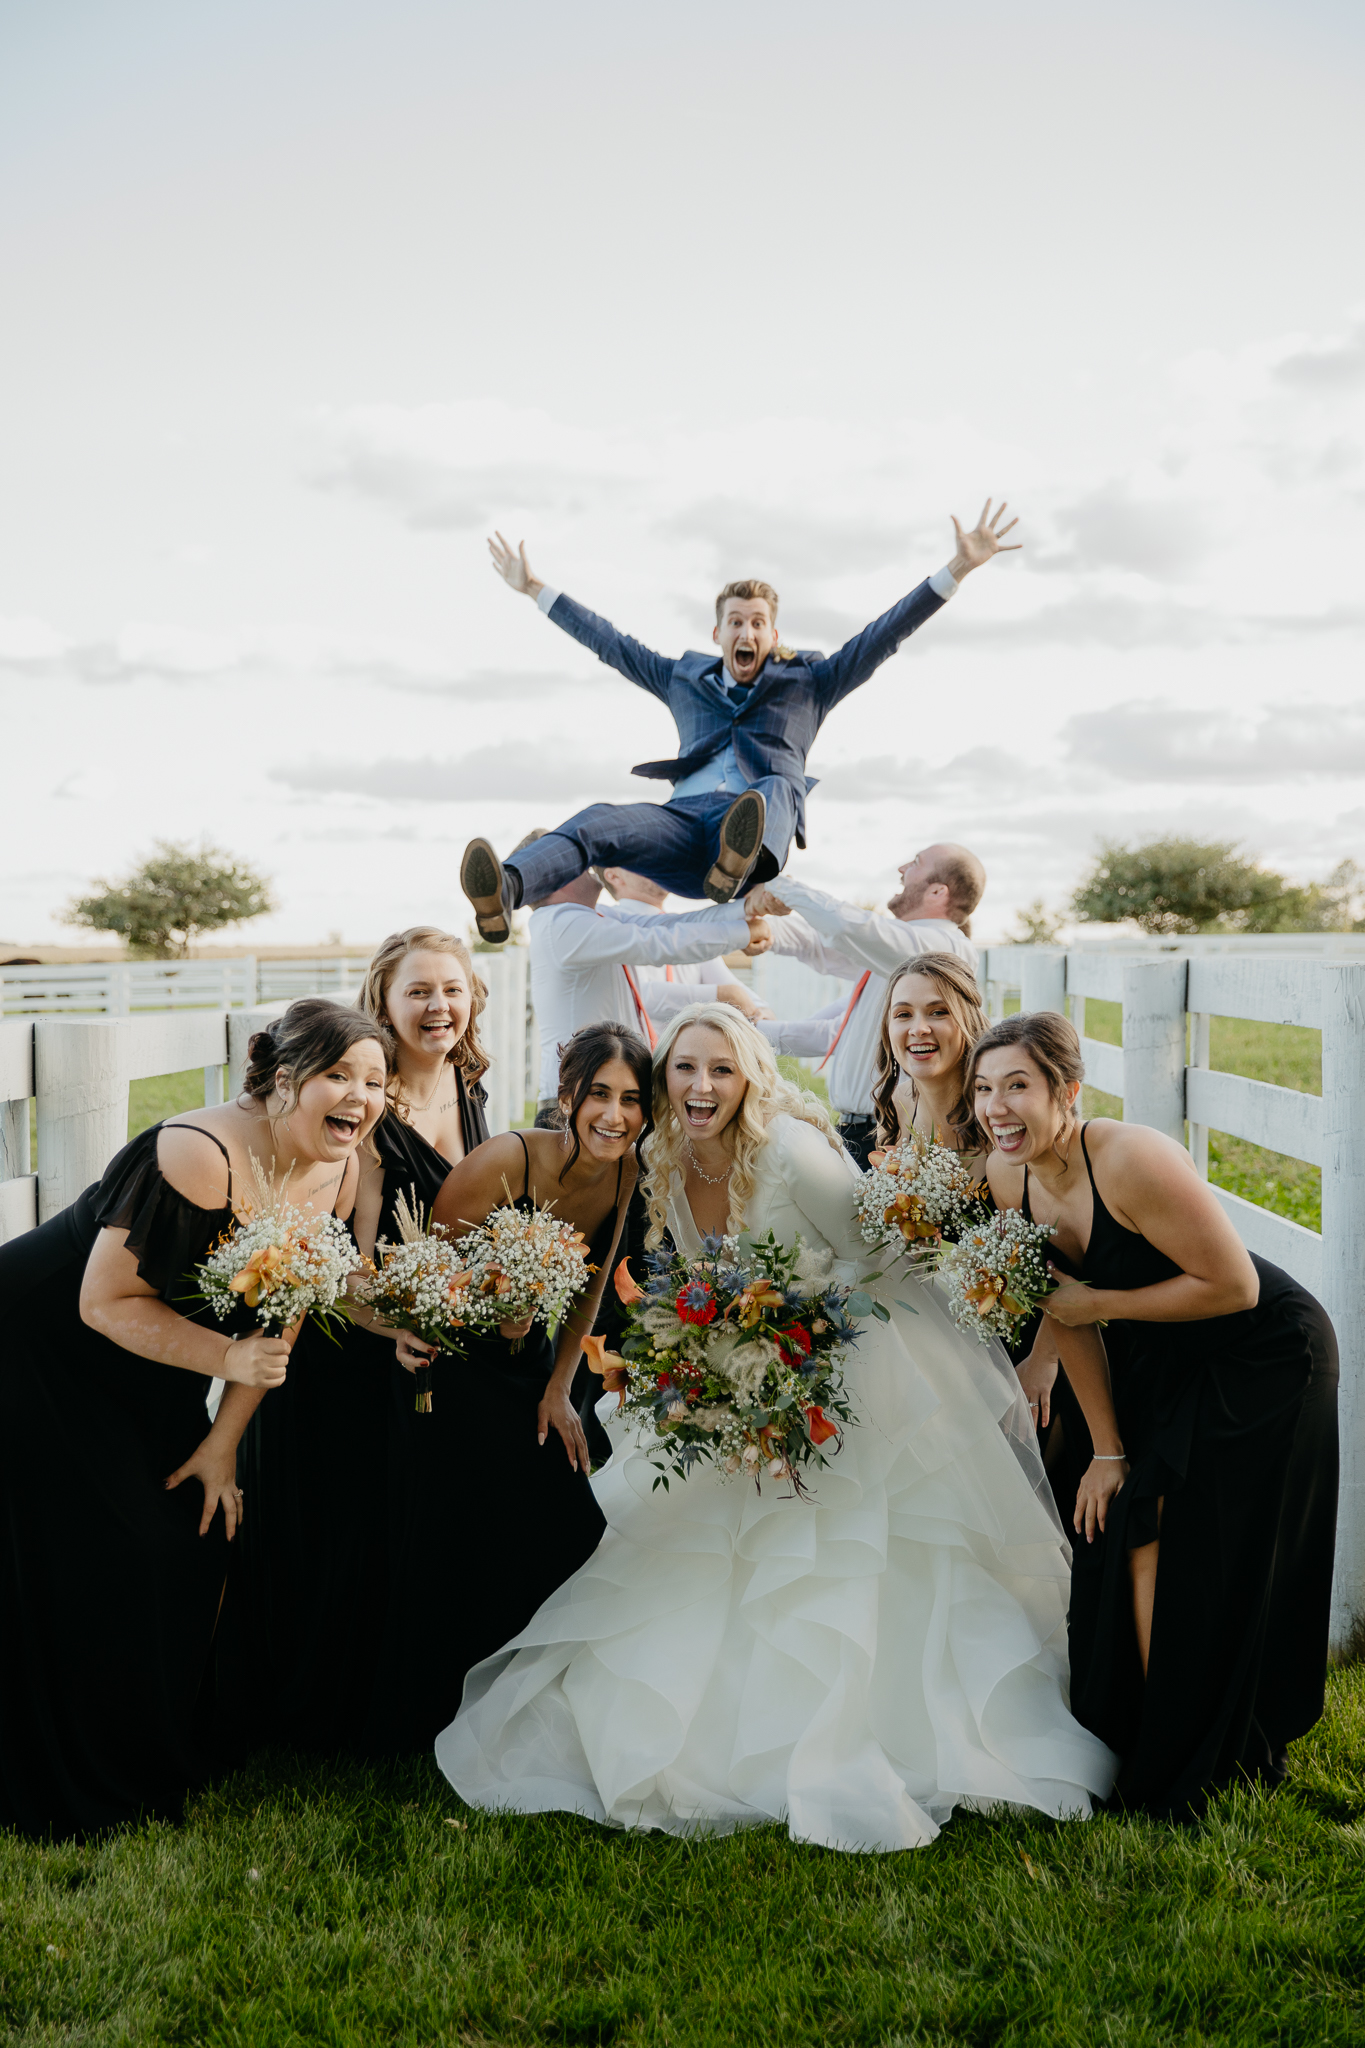 Groom is tossed into the air as wedding party smiles in between horse pastures along the fences